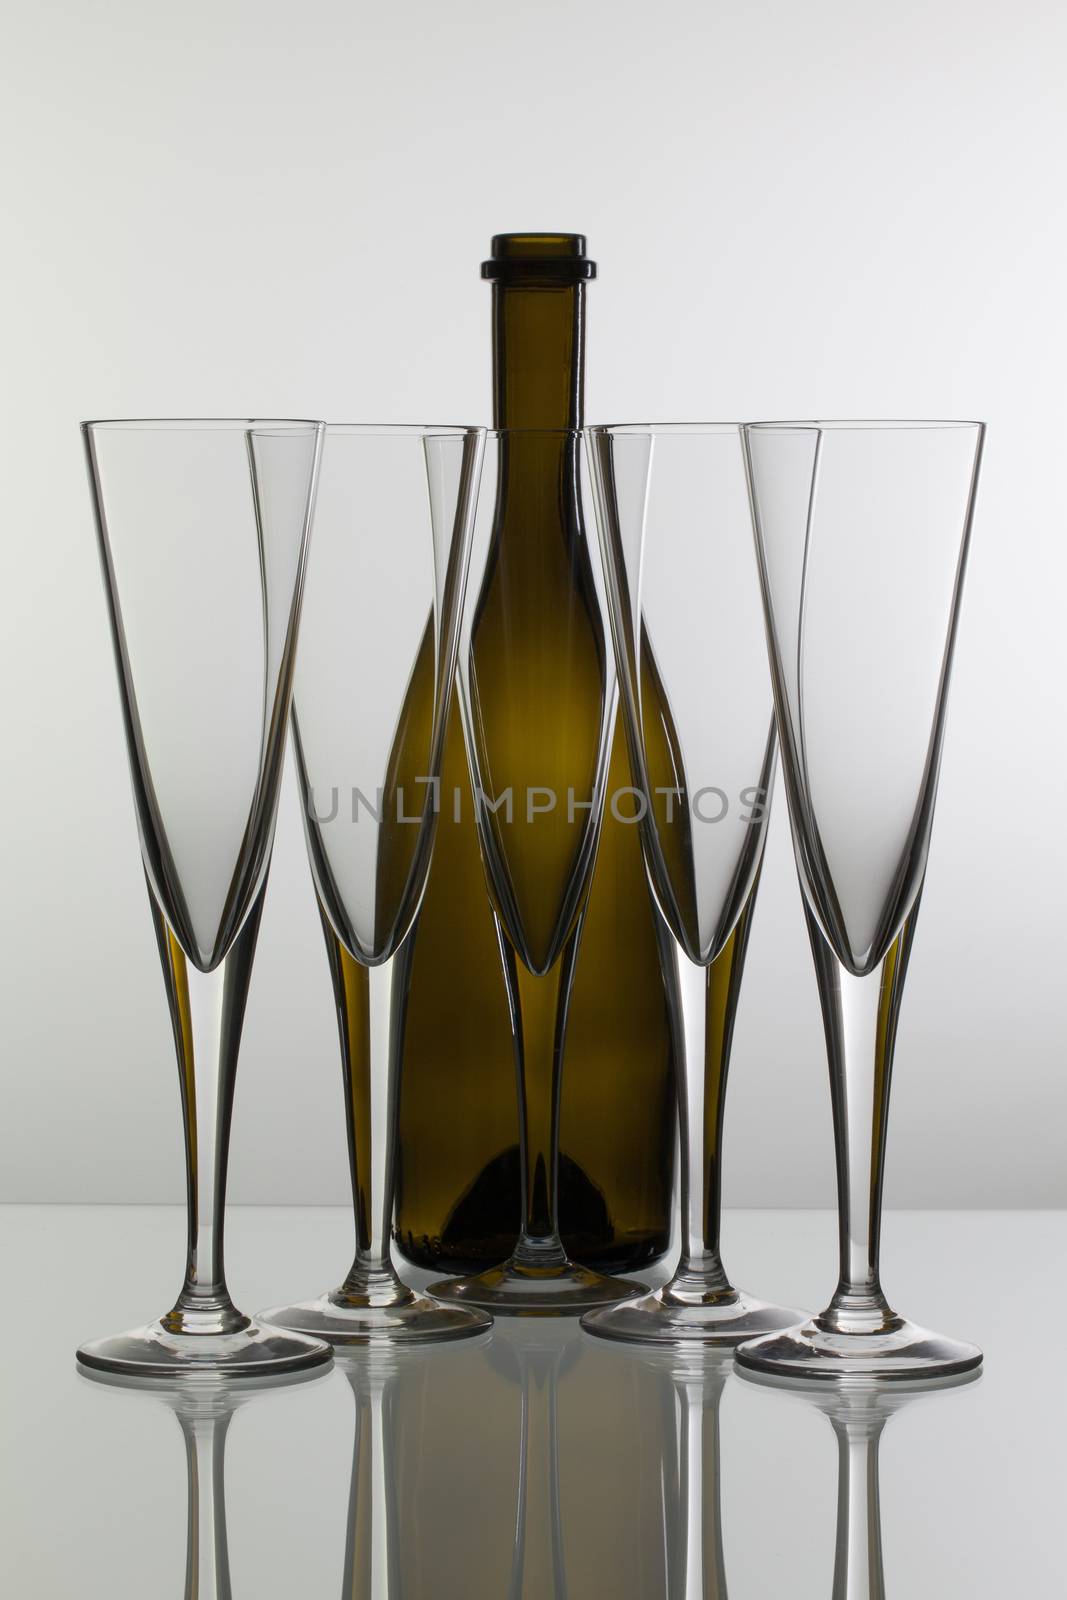 Empty champagne glasses on the glass table by CaptureLight